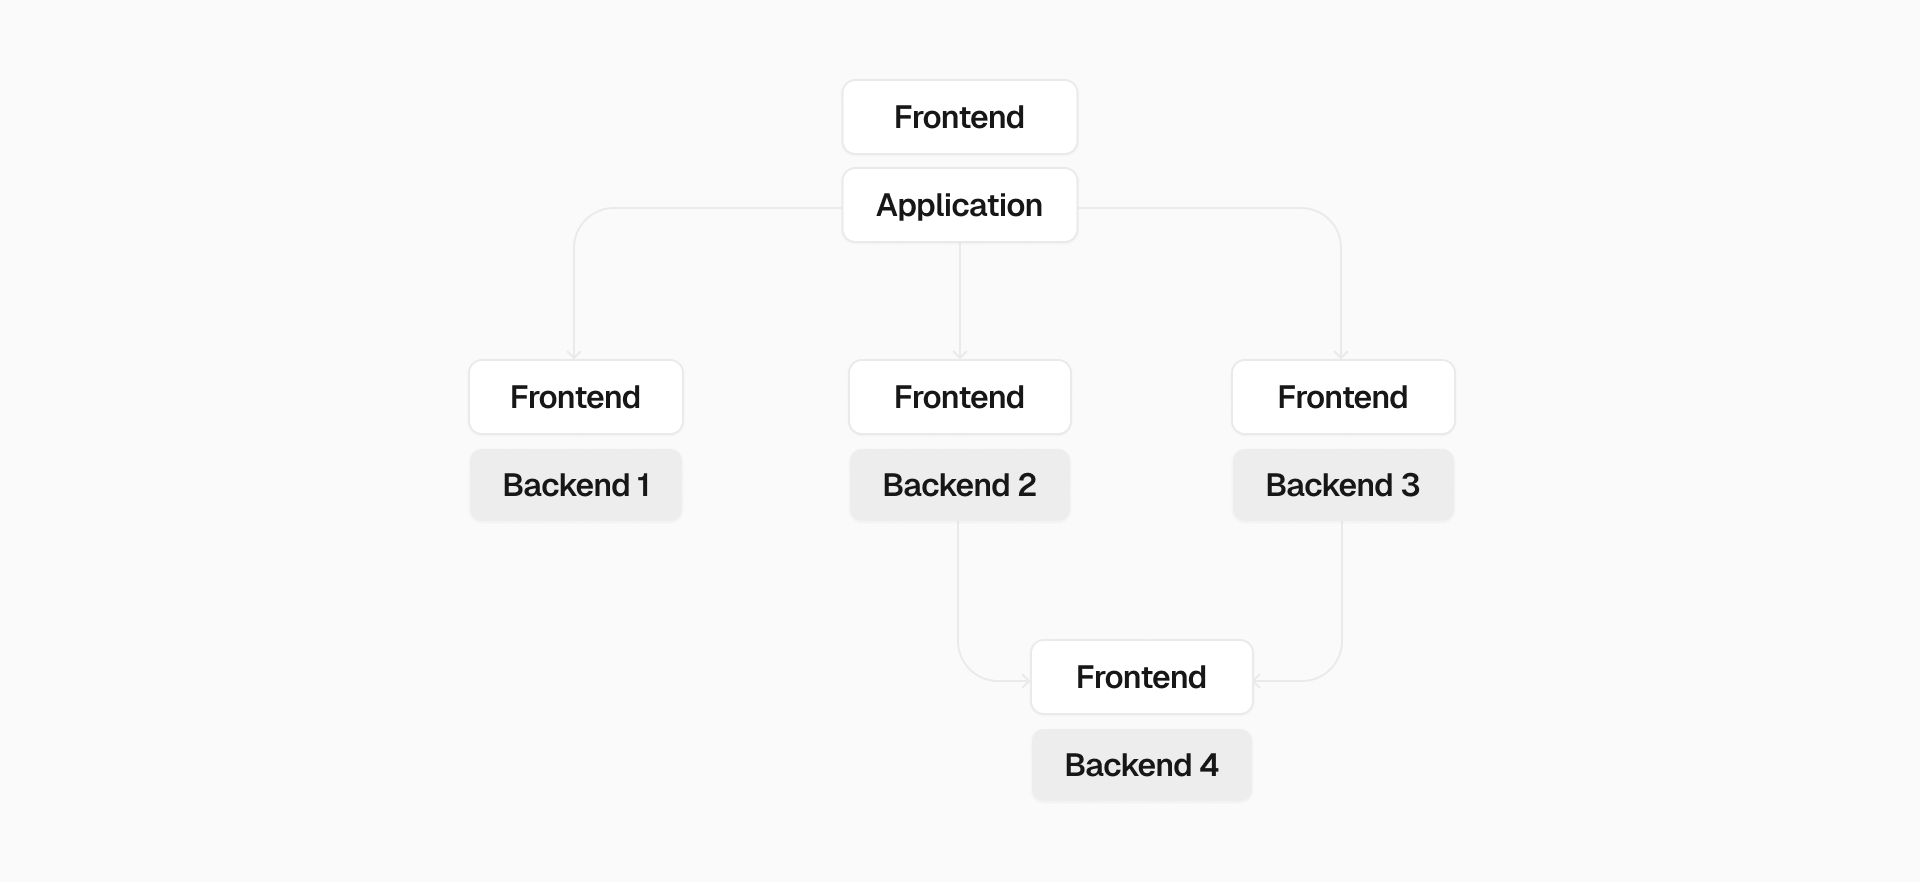 Frontends can be deeply embedded within your application architecture.​​​​‌﻿‍﻿​‍​‍‌‍﻿﻿‌﻿​‍‌‍‍‌‌‍‌﻿‌‍‍‌‌‍﻿‍​‍​‍​﻿‍‍​‍​‍‌‍​﻿‌‍﻿﻿‌‍﻿‍‌﻿‌​‌‍‌‌‌‍﻿‍‌﻿‌​‌‍‌‍‌﻿‌‌‌‍﻿​​‍﻿‍‌‍​﻿‌‍﻿﻿‌‍﻿‌​‍​‍​‍﻿​​‍​‍‌‍‍​‌﻿​‍‌‍‌‌‌‍‌‍​‍​‍​﻿‍‍​‍​‍​‍﻿﻿‌‍​‌‌﻿​​‌‍‍‌​‍﻿﻿‌‍​‍‌‍﻿​‌‍﻿﻿‌‍‌﻿​‍﻿﻿‌‍‌‌‌‍‌​‌‍‍‌‌﻿‌​​﻿﻿﻿‌‍‌‌​﻿﻿‌​﻿​‍‌​‍﻿​﻿​‍‌​‌‌‌​​﻿‌‍﻿‍‌​‍‌‌‍‍‍‌​​‍‌‍﻿‍‌​​‌​﻿‌‌‌‍‌‍‌​‍﻿‌​‍‌‌﻿‌﻿‌​﻿‍‌​‌﻿‌​​‌‌​‍‌‌​​‌‌‍​‍​‍‌‍‌﻿‌​​﻿﻿‌‌‍​‌​‍​‍​‍﻿​​‍​‍‌﻿‌​‌﻿‍‌‌﻿​​‌‍‌‌​‍​‍​﻿‍‍​‍​‍‌﻿‌​‌‍‌‌‌﻿‍​‌﻿‌​​‍​‍​‍﻿​​‍​‍‌‍‌​‌‍​‌‌﻿‌​‌‍​‌​‍​‍​﻿‍‍​‍​‍‌‍‌​‌‍‌‌‌﻿​﻿‌‍​﻿‌﻿​‍‌‍‍‌‌﻿​​‌﻿‌​‌‍‍‌‌‍﻿﻿‌‍﻿‍​‍​‍‌﻿﻿‌